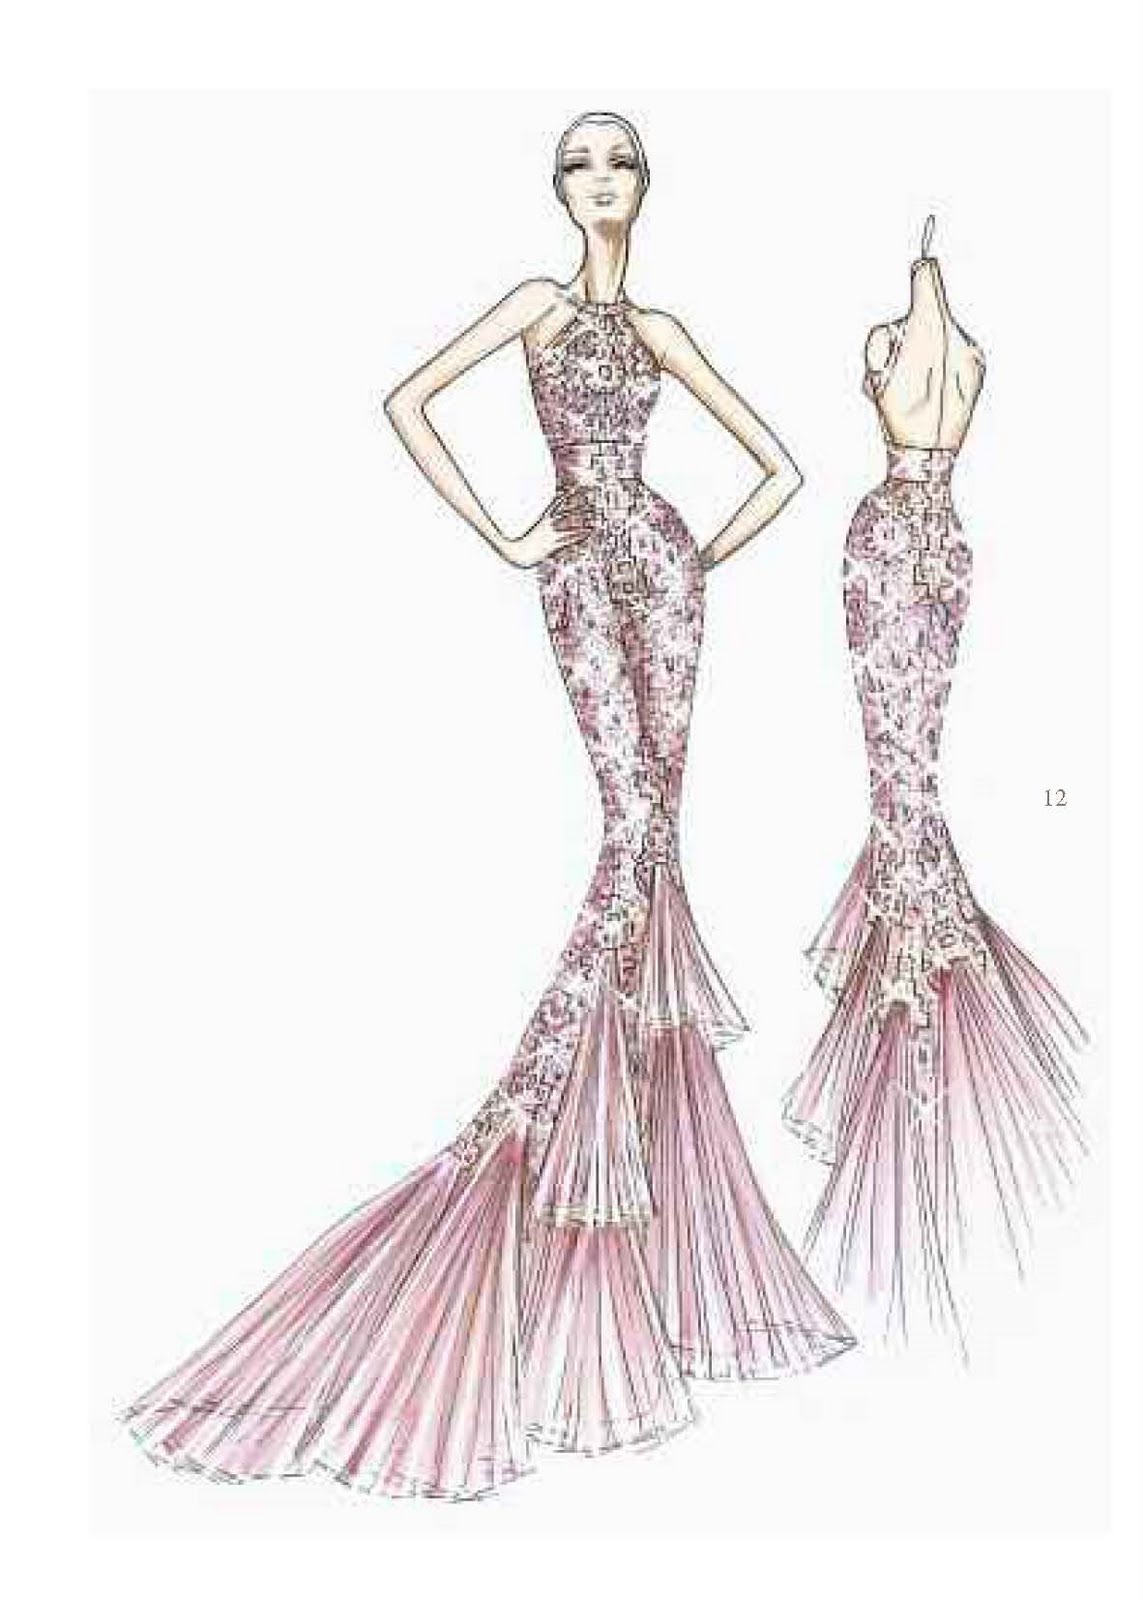 EDITH SAYLOR STYLE: EXCLUSIVE SKETCHES FROM THE VERSACE 